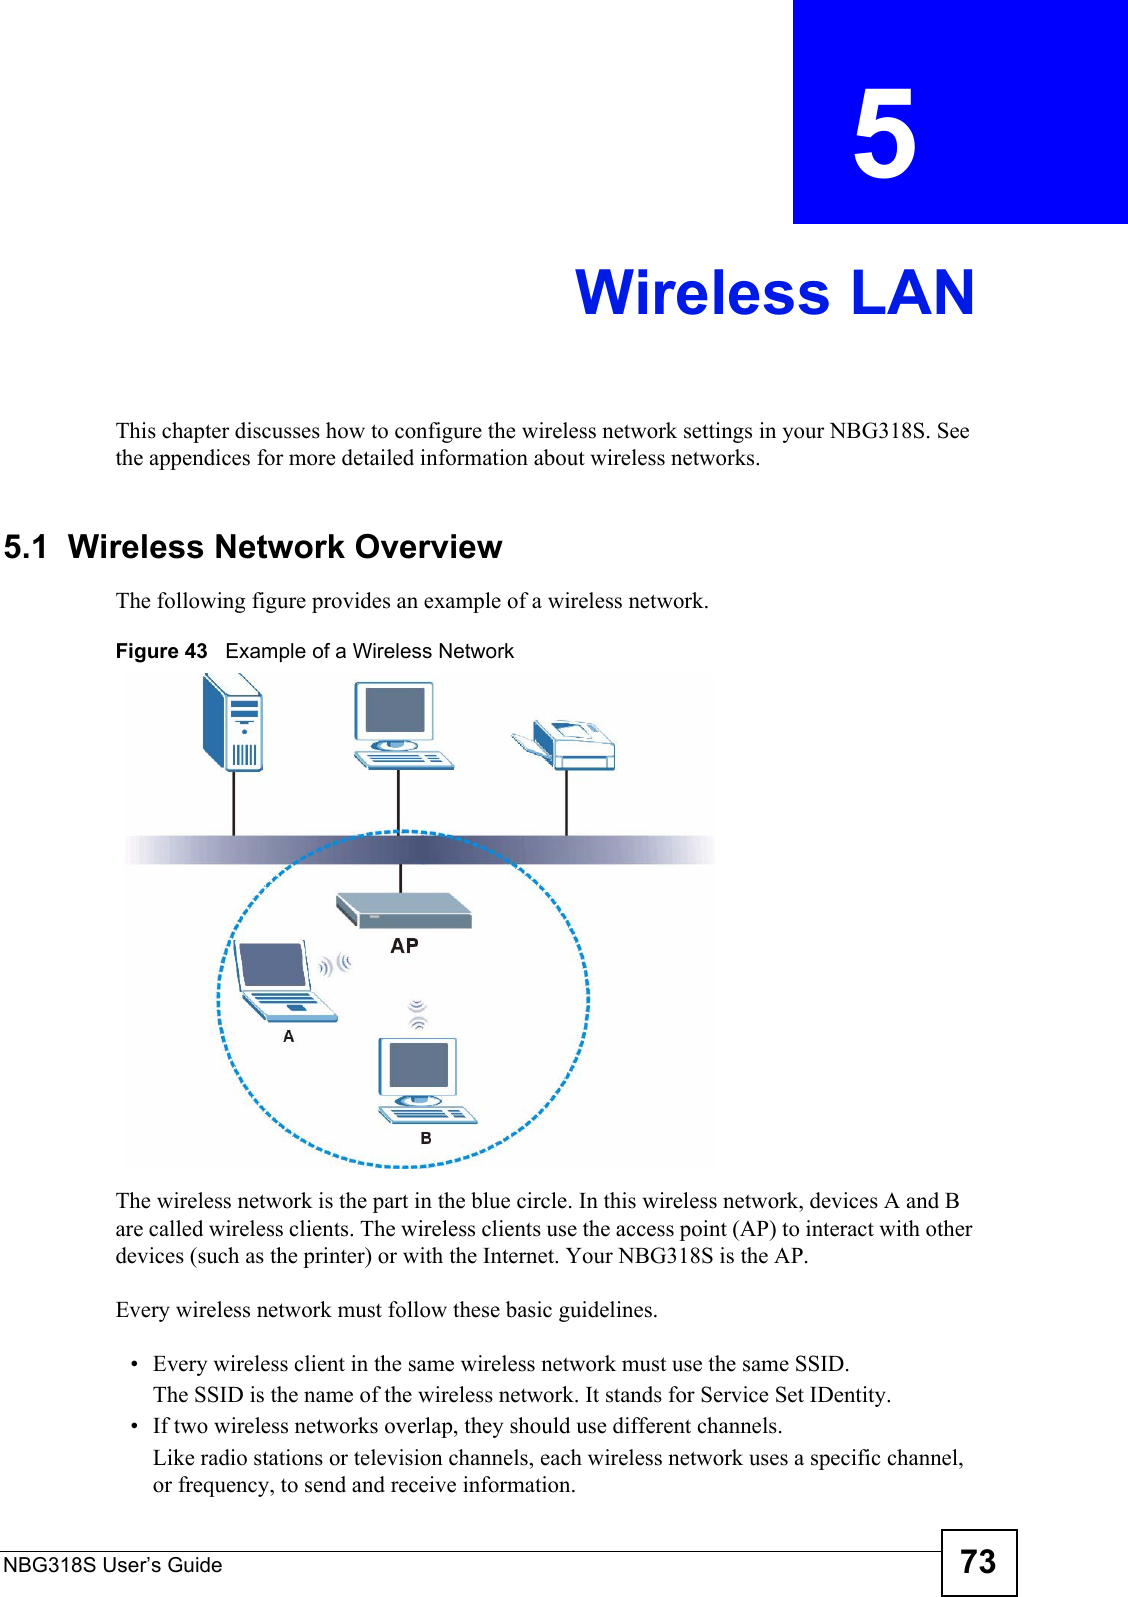 NBG318S User’s Guide 73CHAPTER  5 Wireless LANThis chapter discusses how to configure the wireless network settings in your NBG318S. See the appendices for more detailed information about wireless networks.5.1  Wireless Network OverviewThe following figure provides an example of a wireless network.Figure 43   Example of a Wireless NetworkThe wireless network is the part in the blue circle. In this wireless network, devices A and B are called wireless clients. The wireless clients use the access point (AP) to interact with other devices (such as the printer) or with the Internet. Your NBG318S is the AP.Every wireless network must follow these basic guidelines.• Every wireless client in the same wireless network must use the same SSID.The SSID is the name of the wireless network. It stands for Service Set IDentity.• If two wireless networks overlap, they should use different channels.Like radio stations or television channels, each wireless network uses a specific channel, or frequency, to send and receive information.